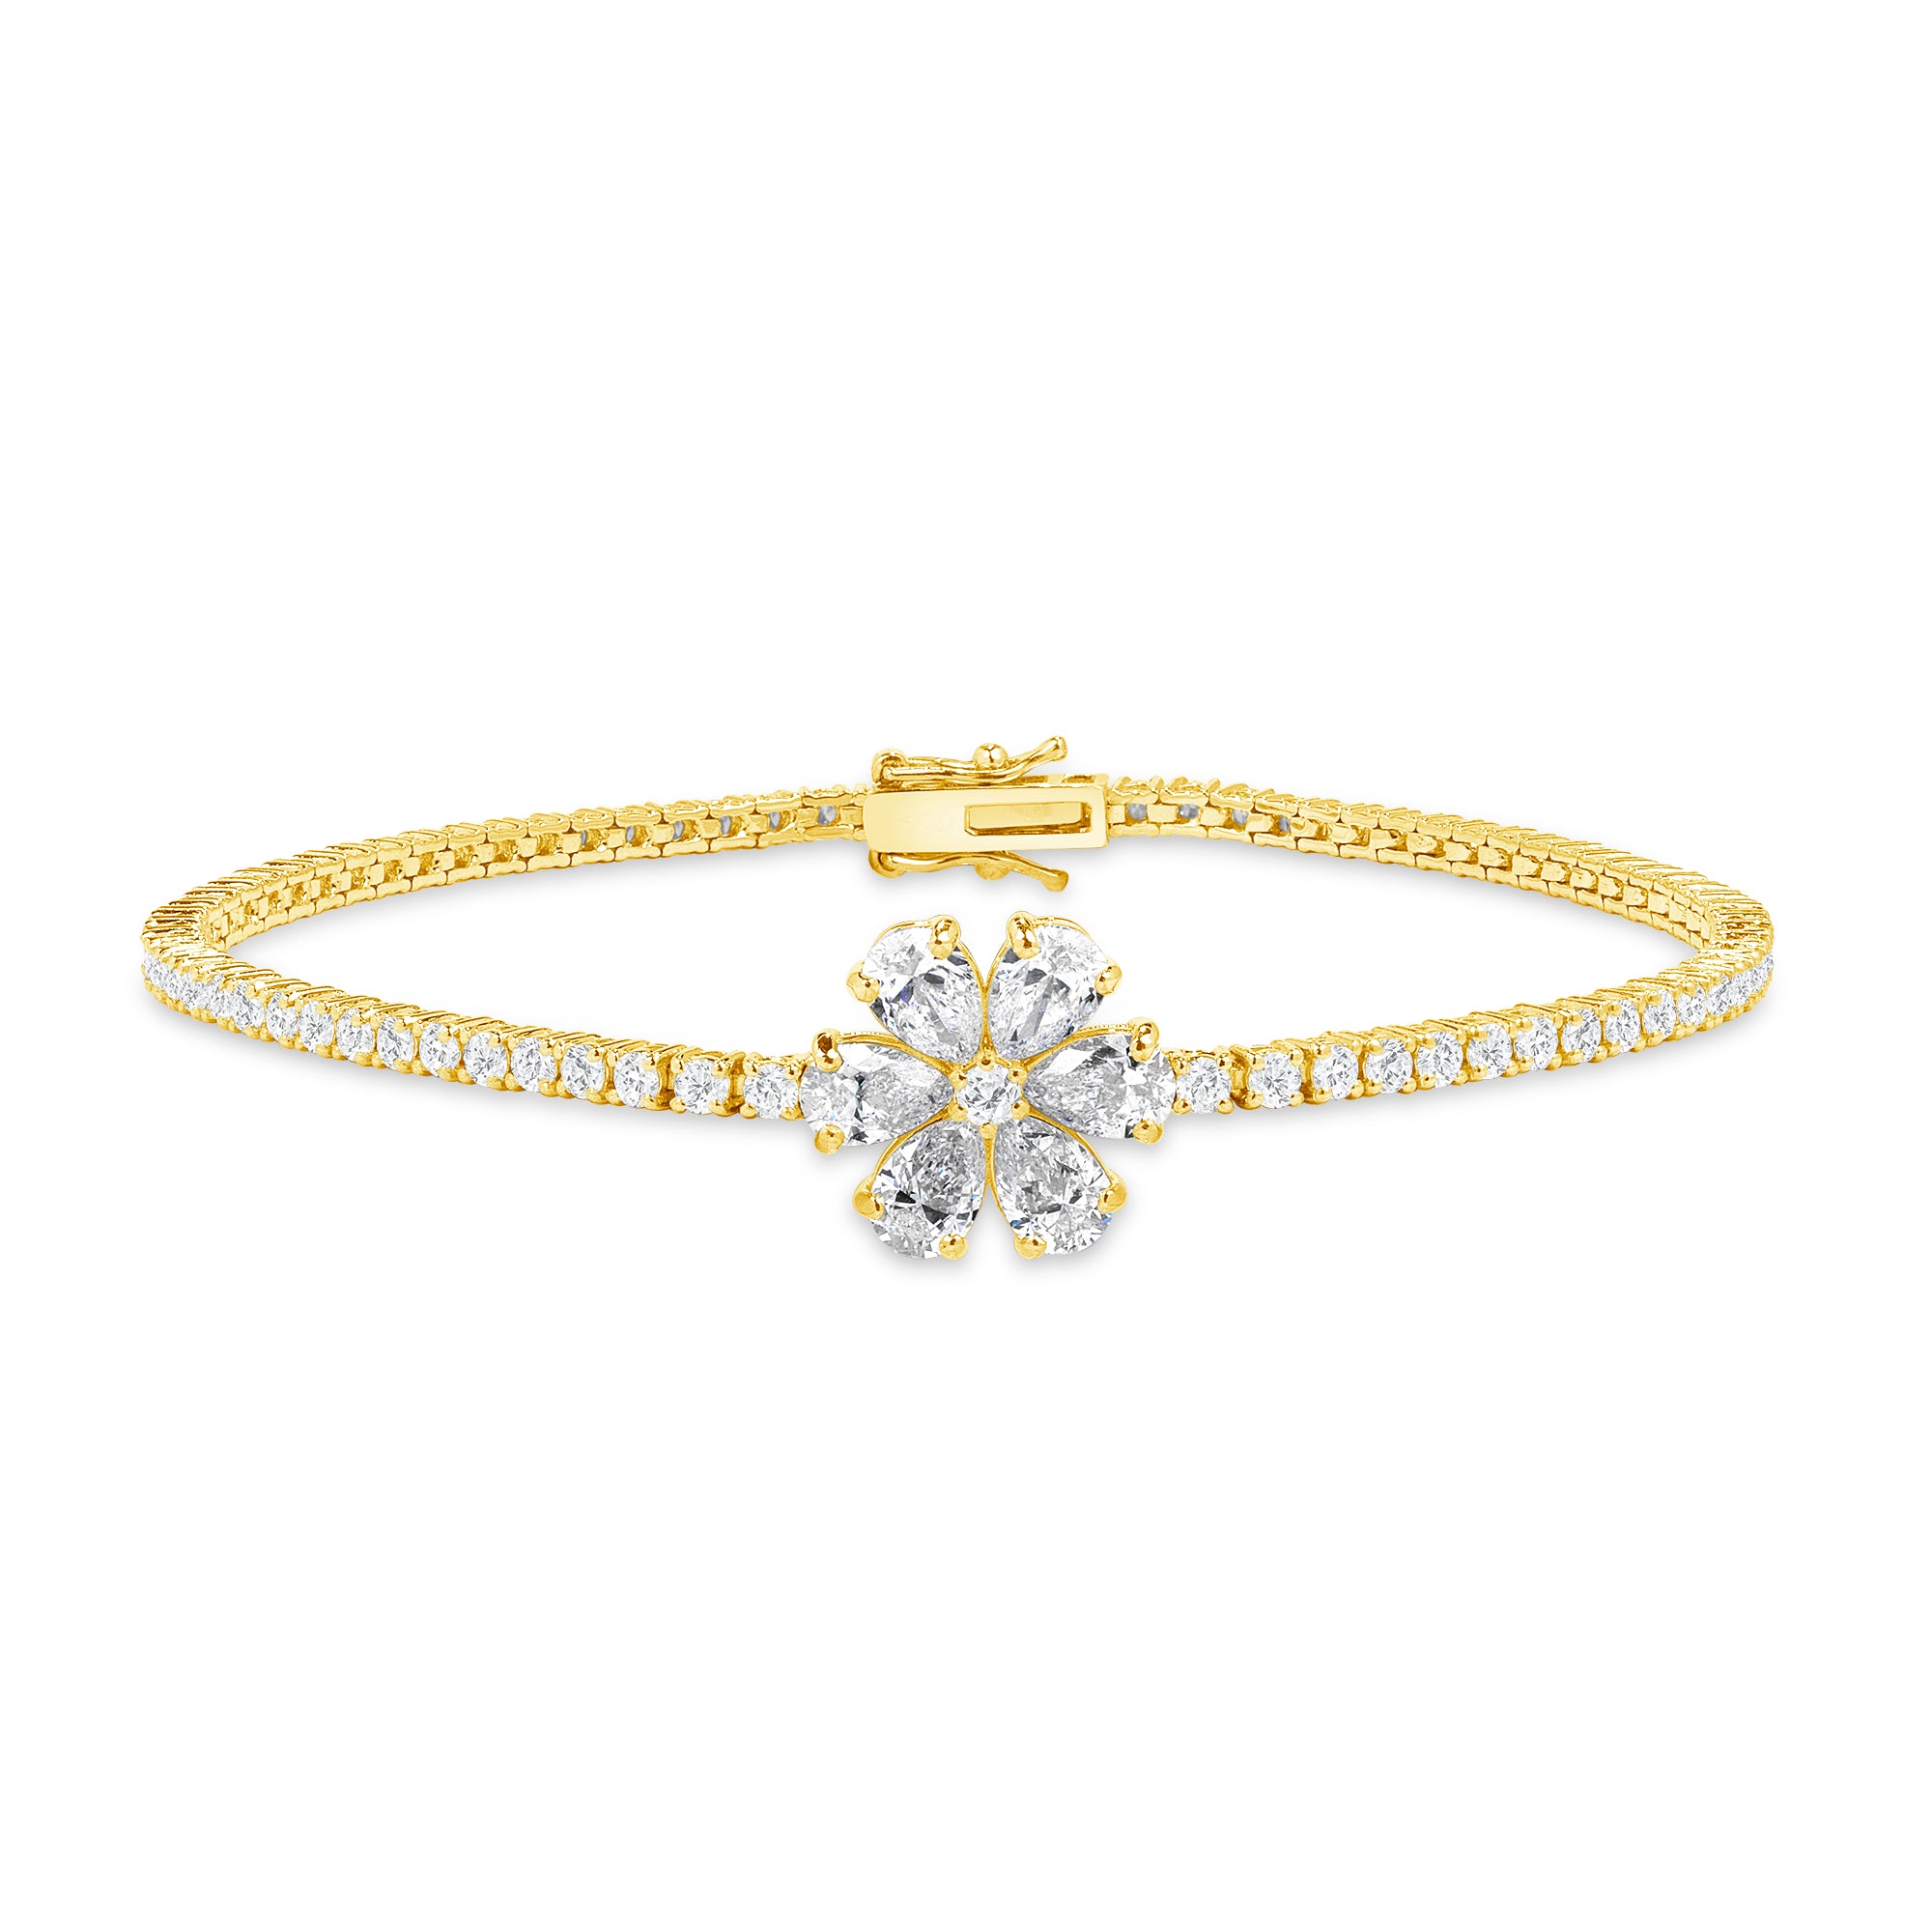 3.95ctw Mixed Cut Diamond Tennis Bracelet With Flower Accent Stone in 18K Yellow Gold